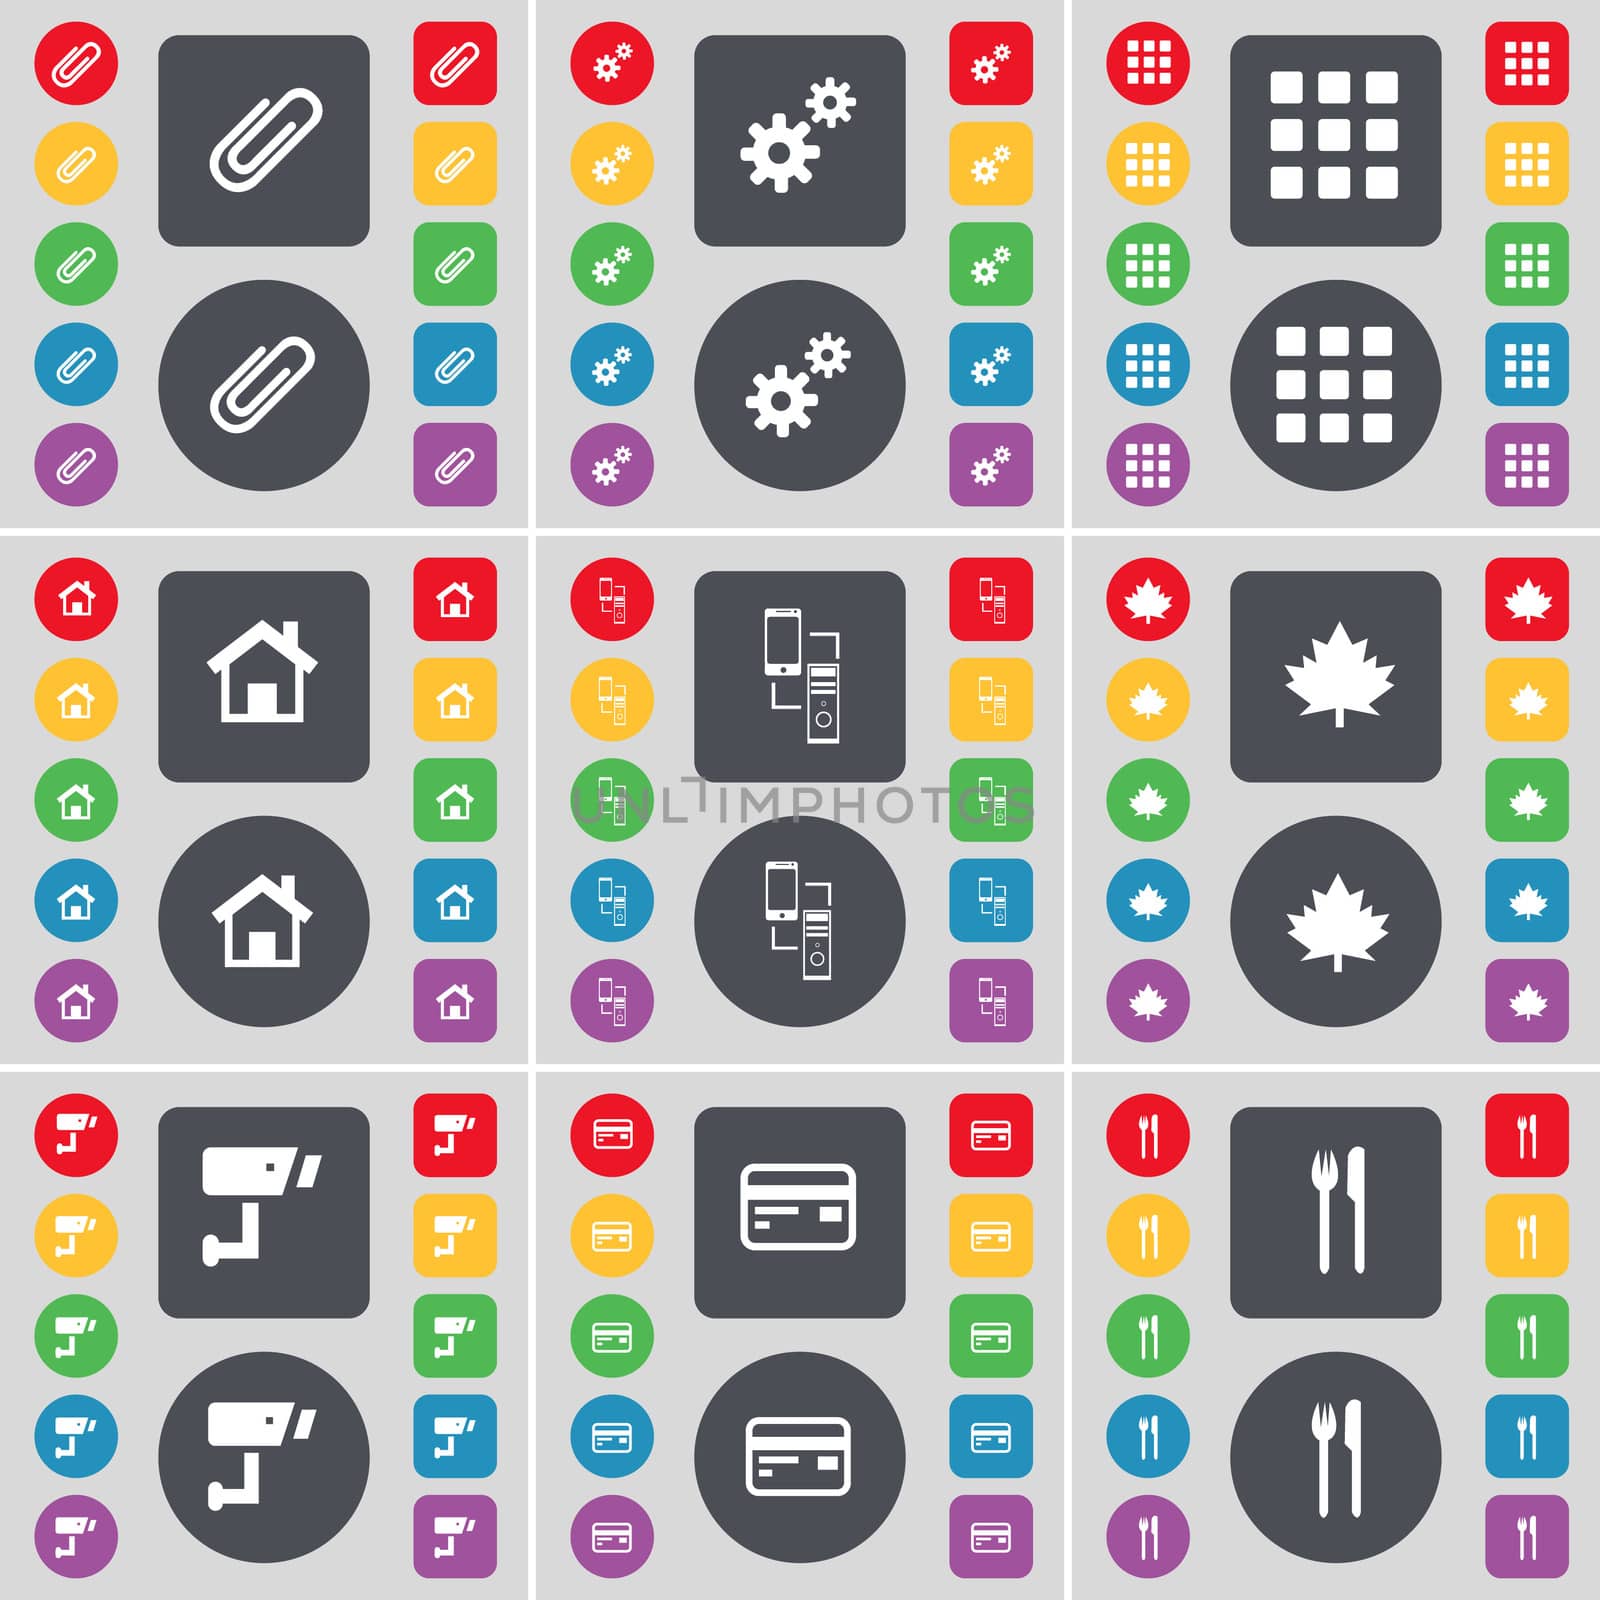 Clip, Gear, Apps, House, Connection, Maple leaf, CCTV, Credit card, Fork and knife icon symbol. A large set of flat, colored buttons for your design.  by serhii_lohvyniuk